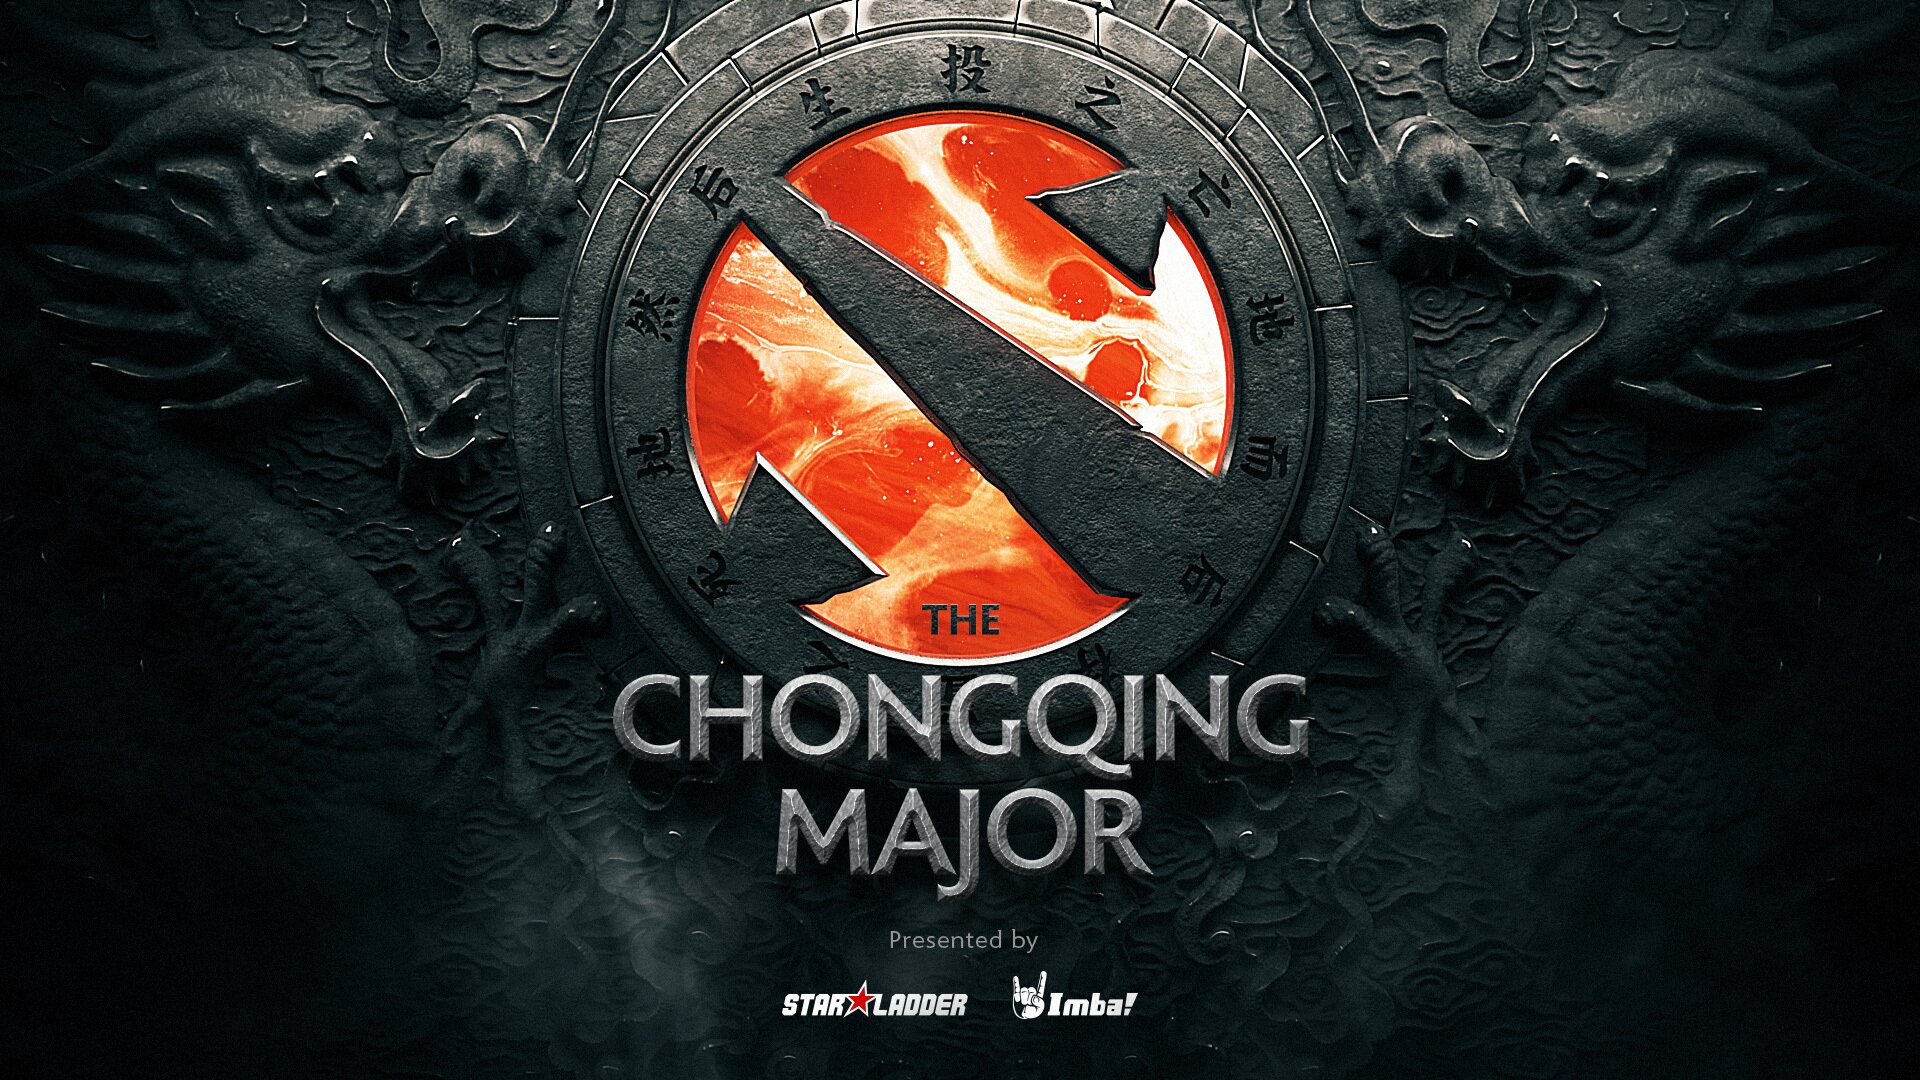 Twenty-four hours after test 123, formerly known as Pain X, earned their ticket to the Chongqing Major, Valve has taken it away.